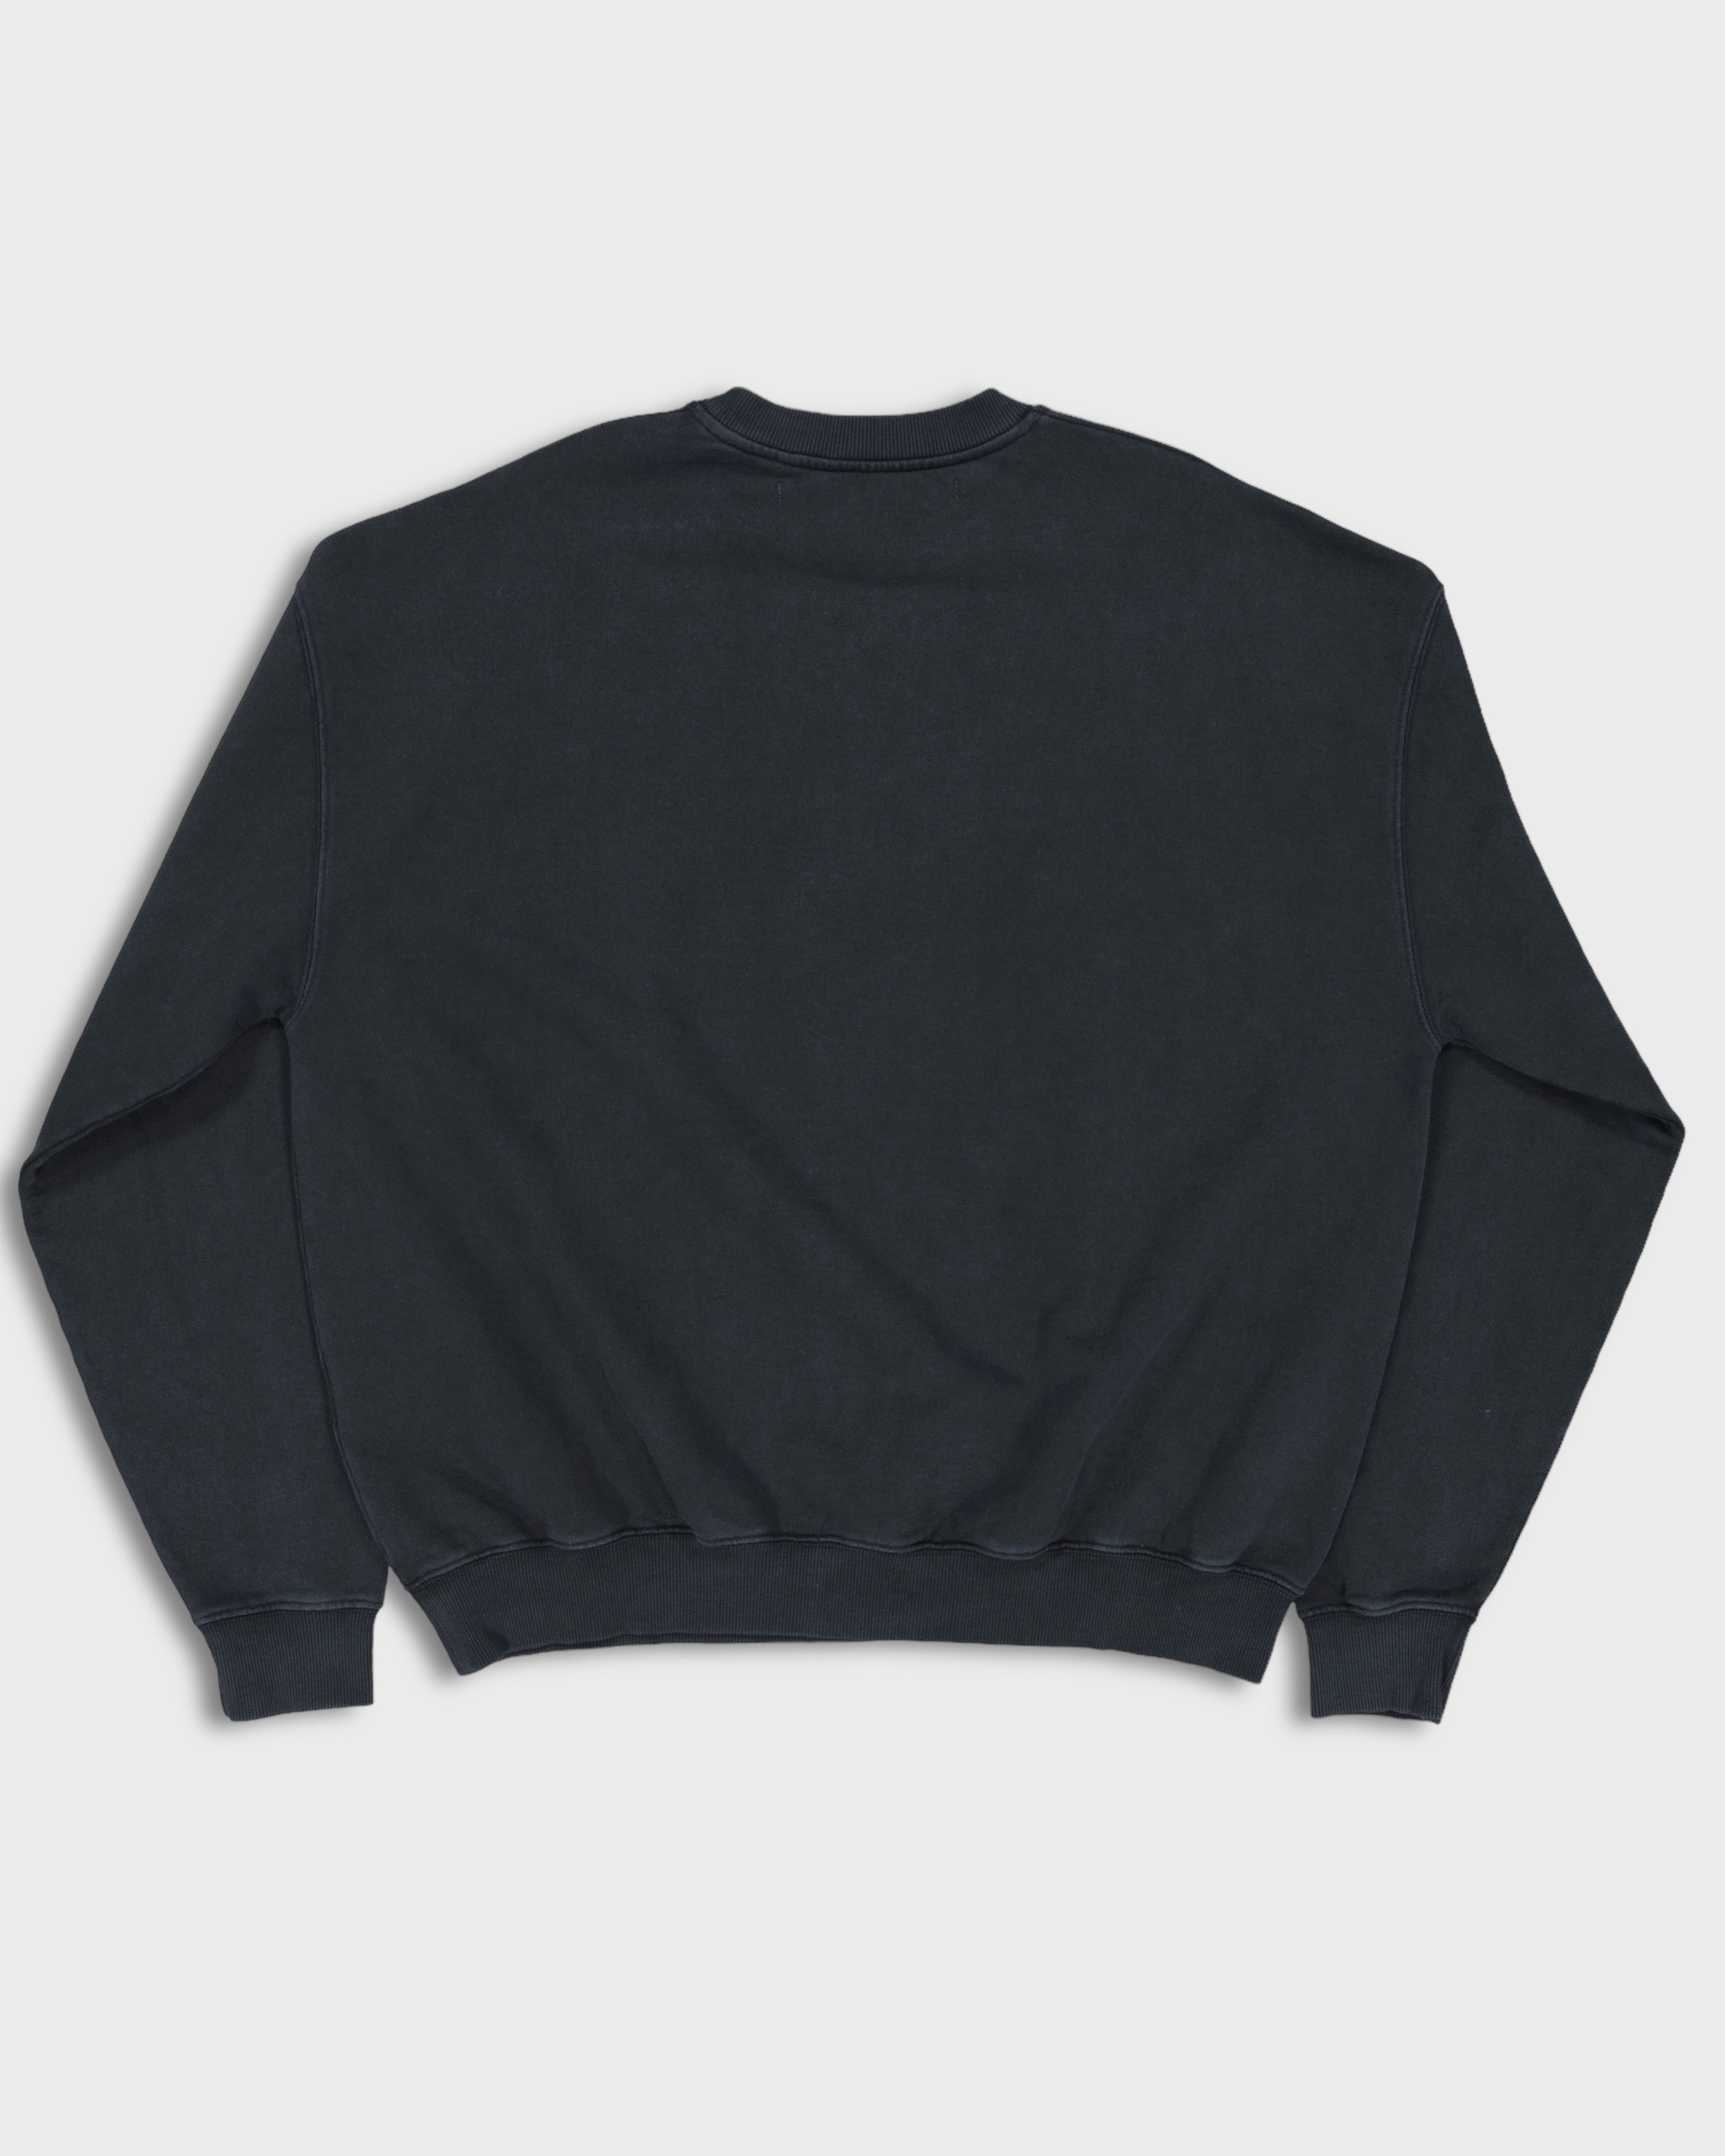 ‘AHEAD OF THE CURVE’ SWEATER